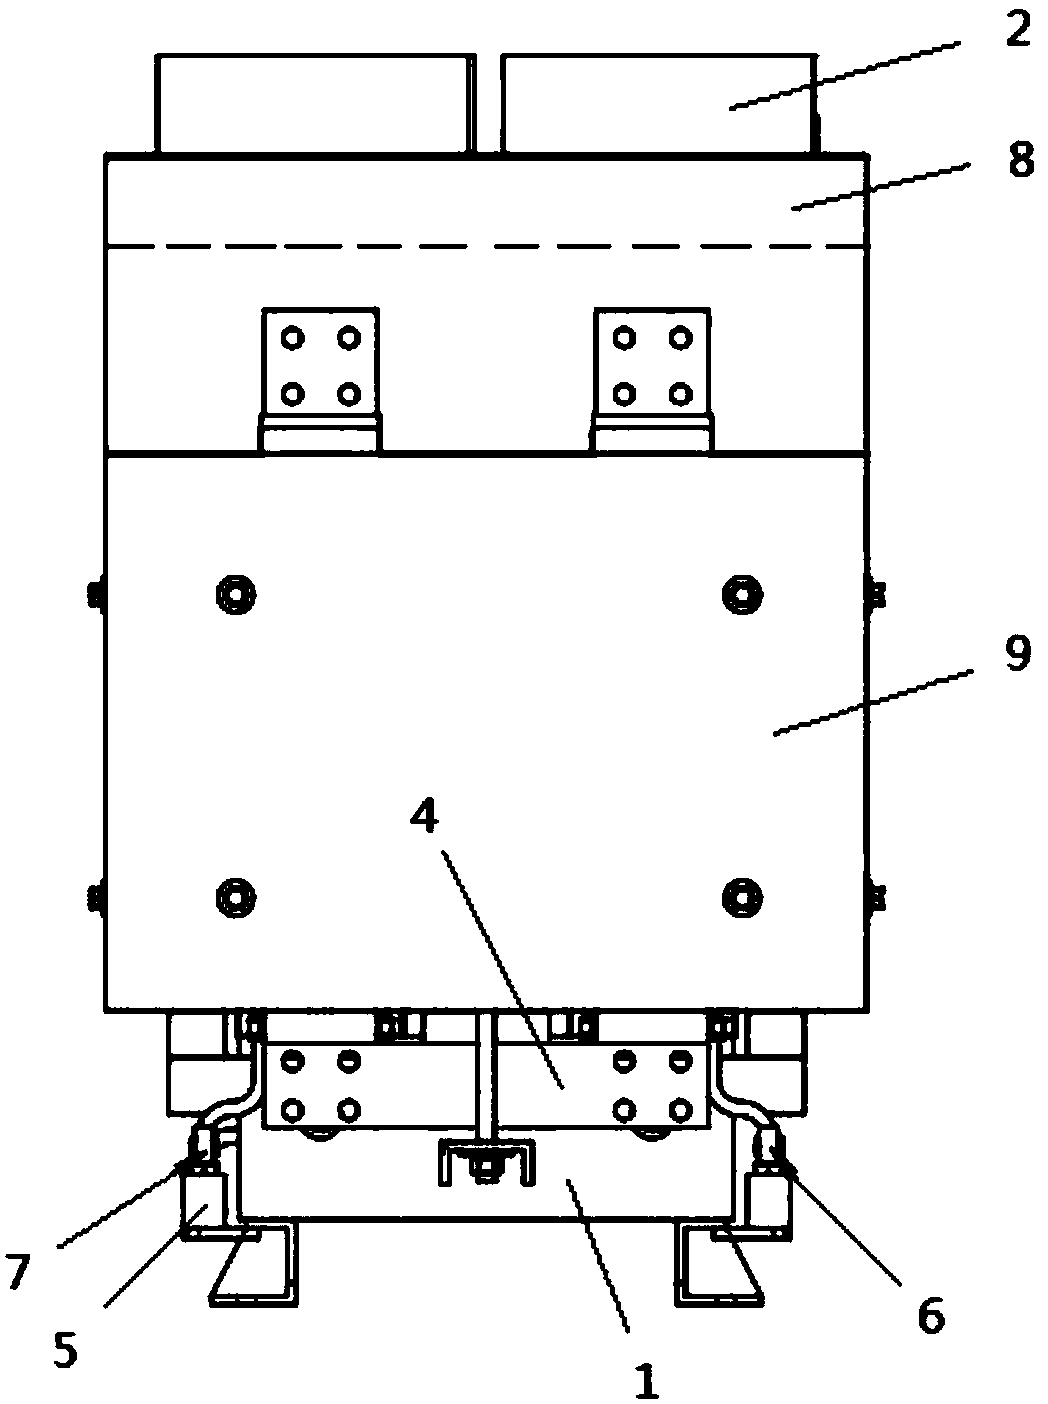 An air-cooled water-cooled integrated reactor